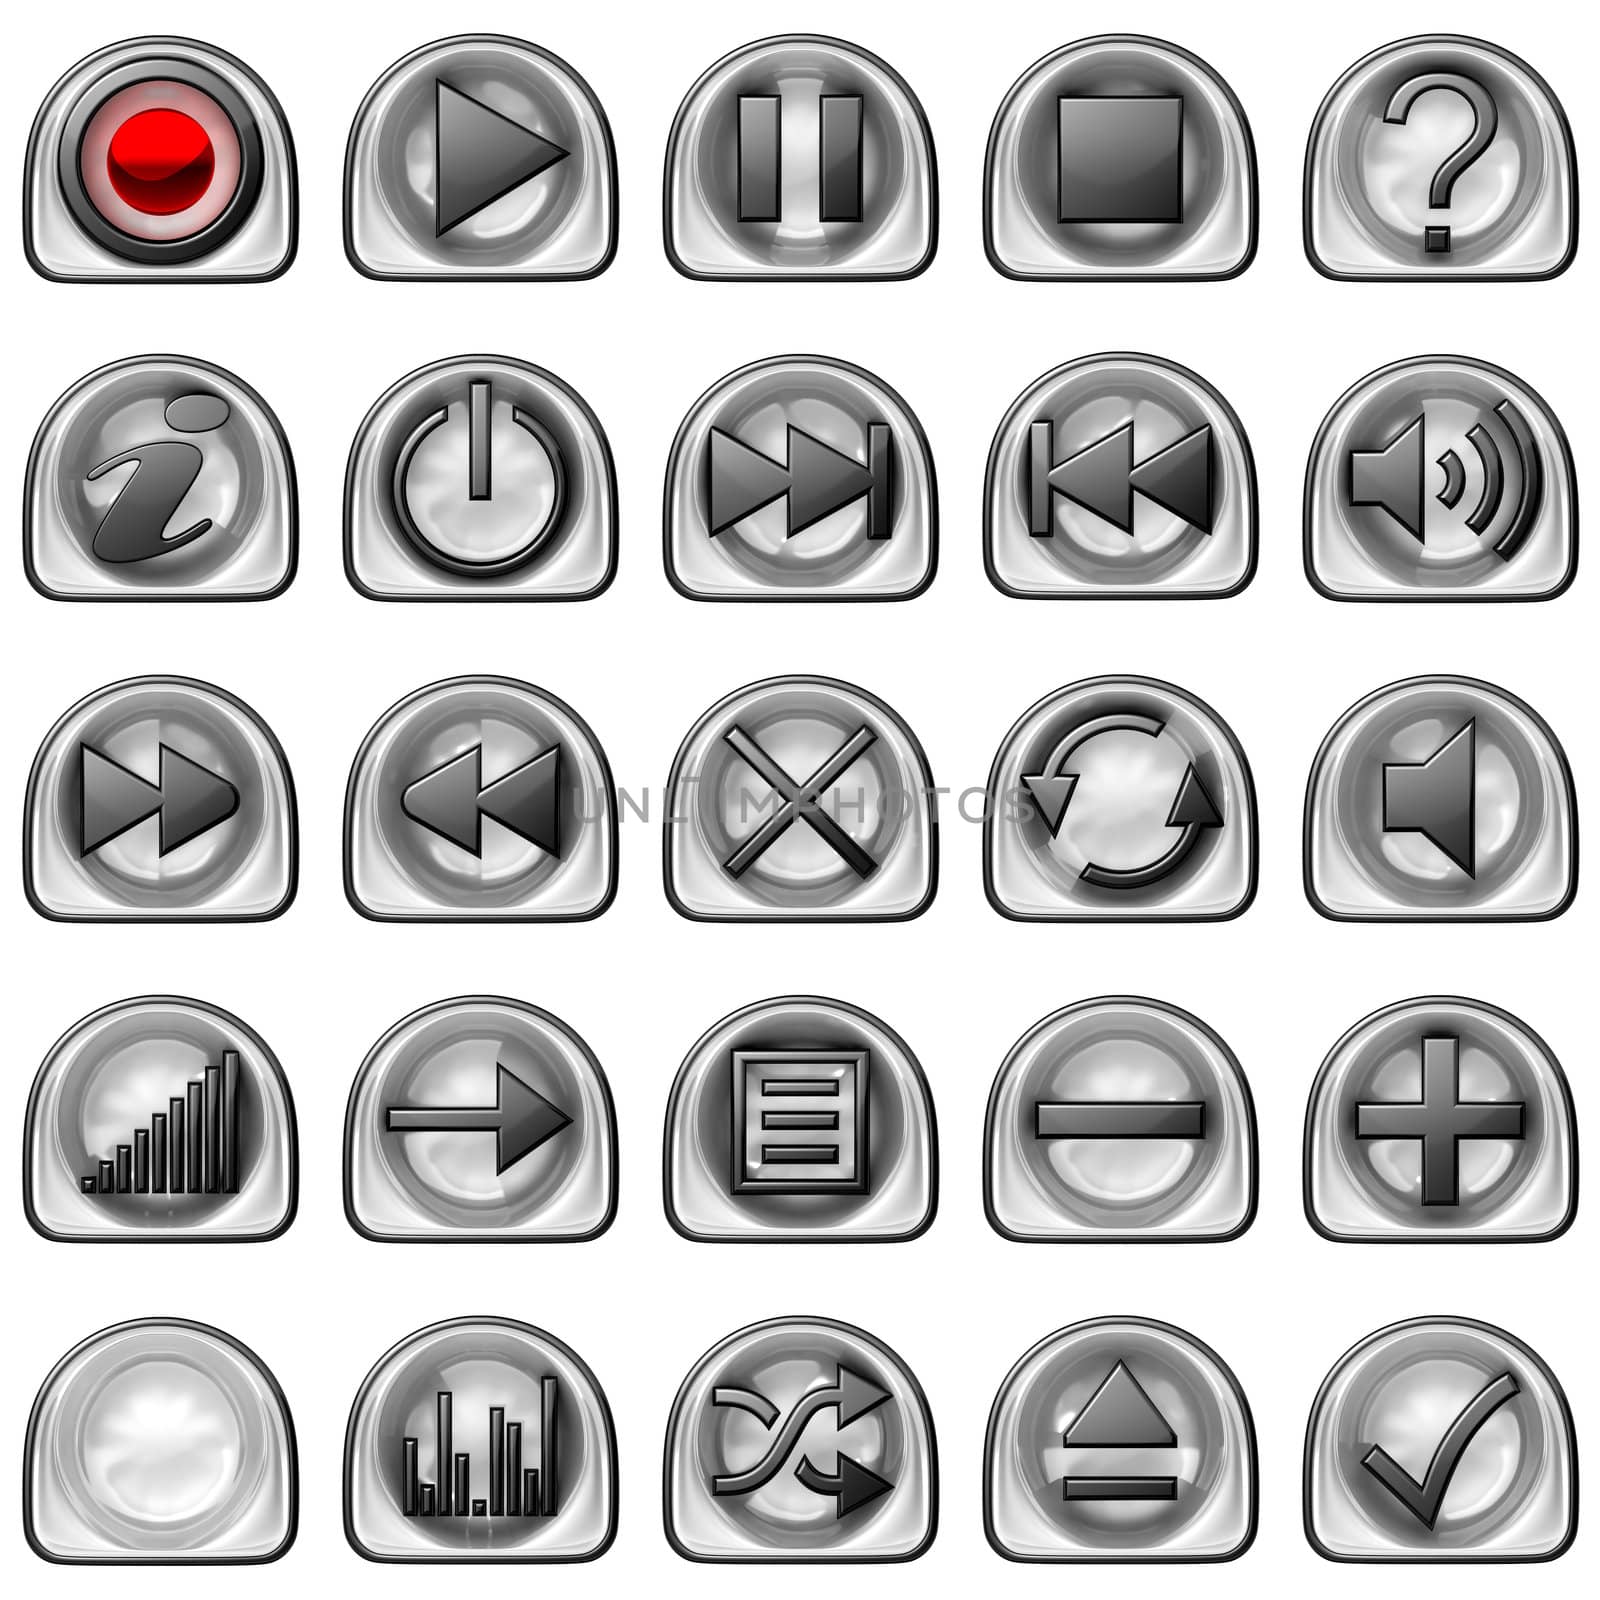 Semicircular pressed Control panel buttons isolated on white